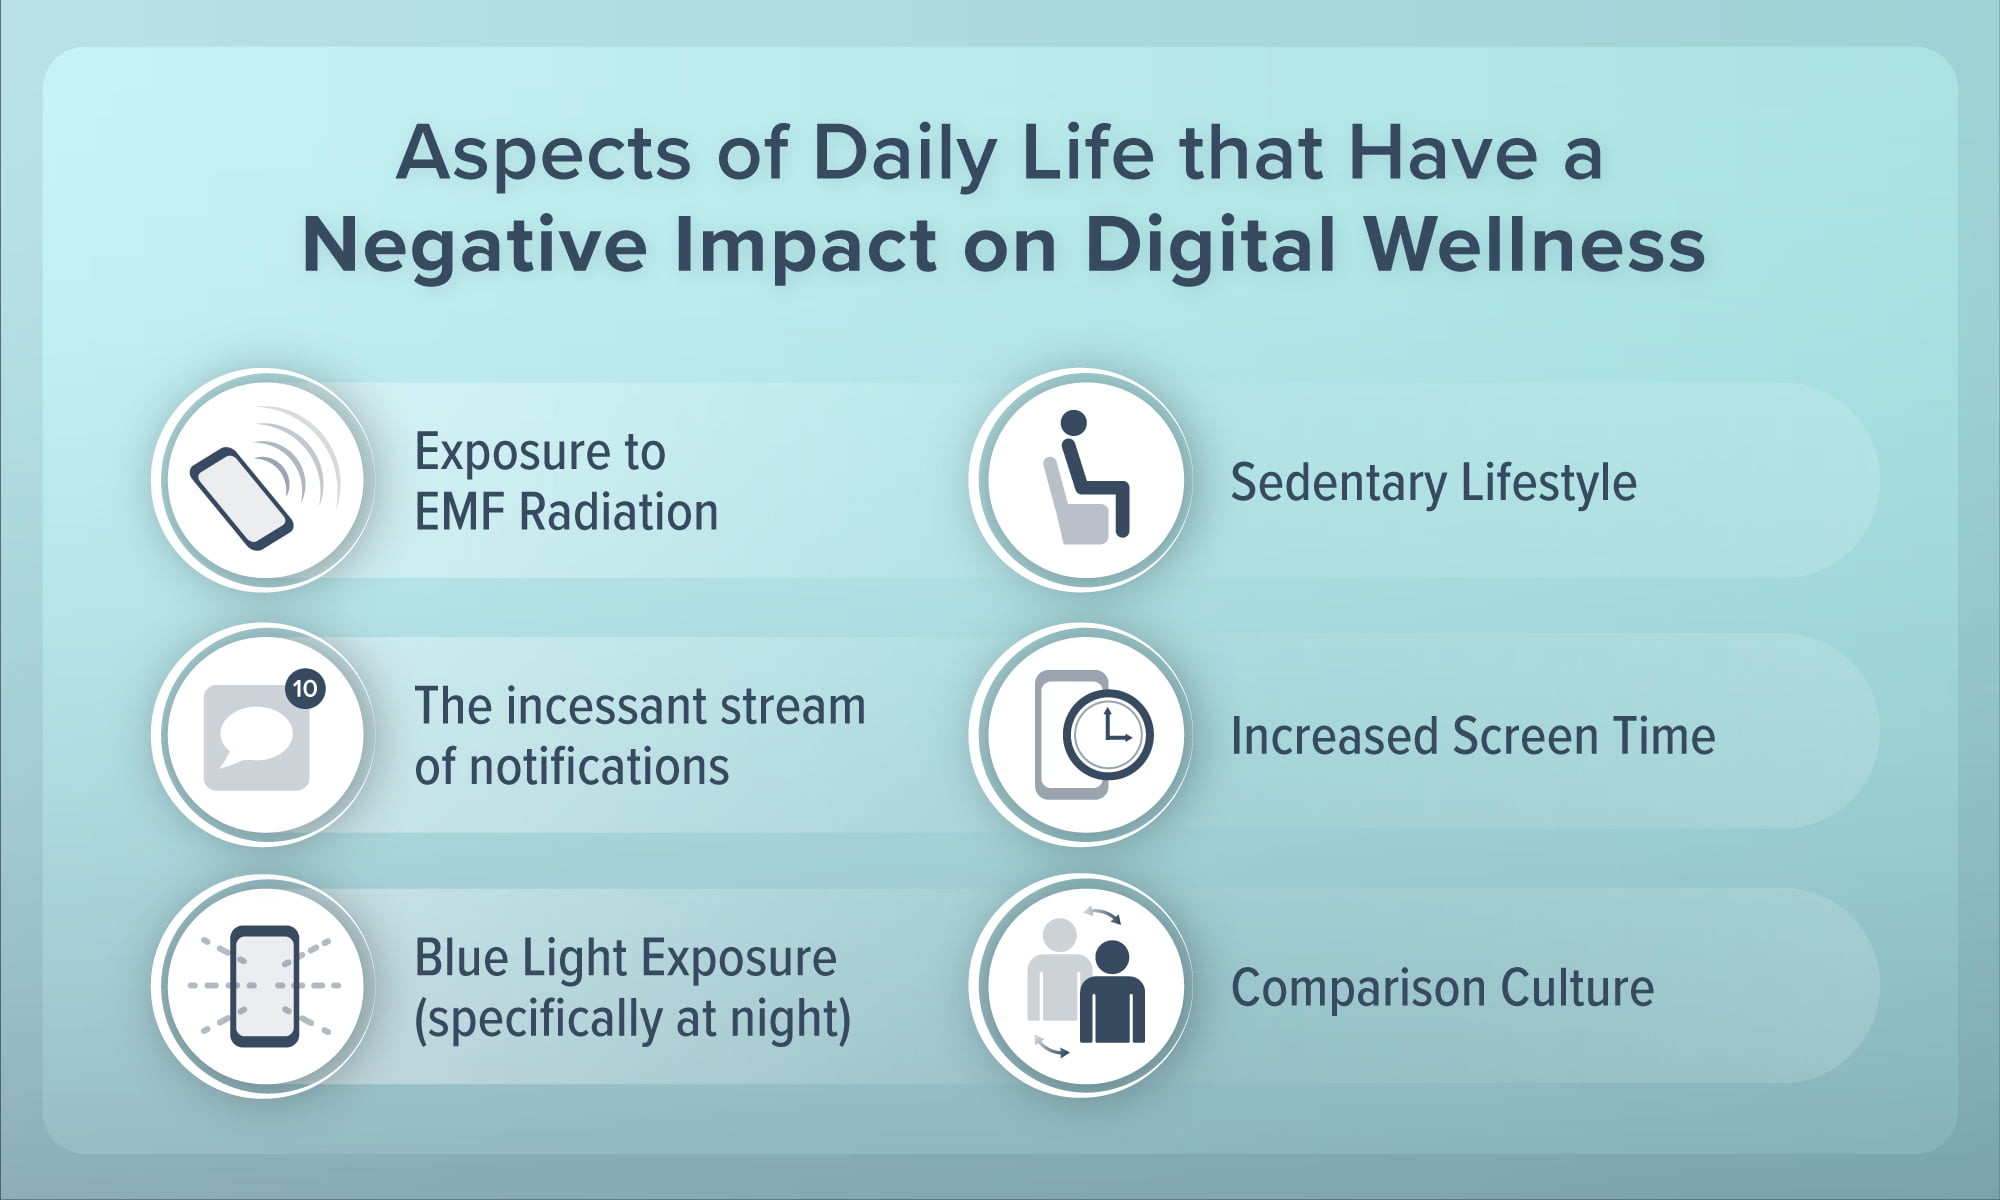 An infographic illustrating aspects of daily life that negatively impact digital wellness, including exposure to EMF radiation, a sedentary lifestyle, the constant influx of notifications, extended screen time, blue light exposure, and the culture of comparison.